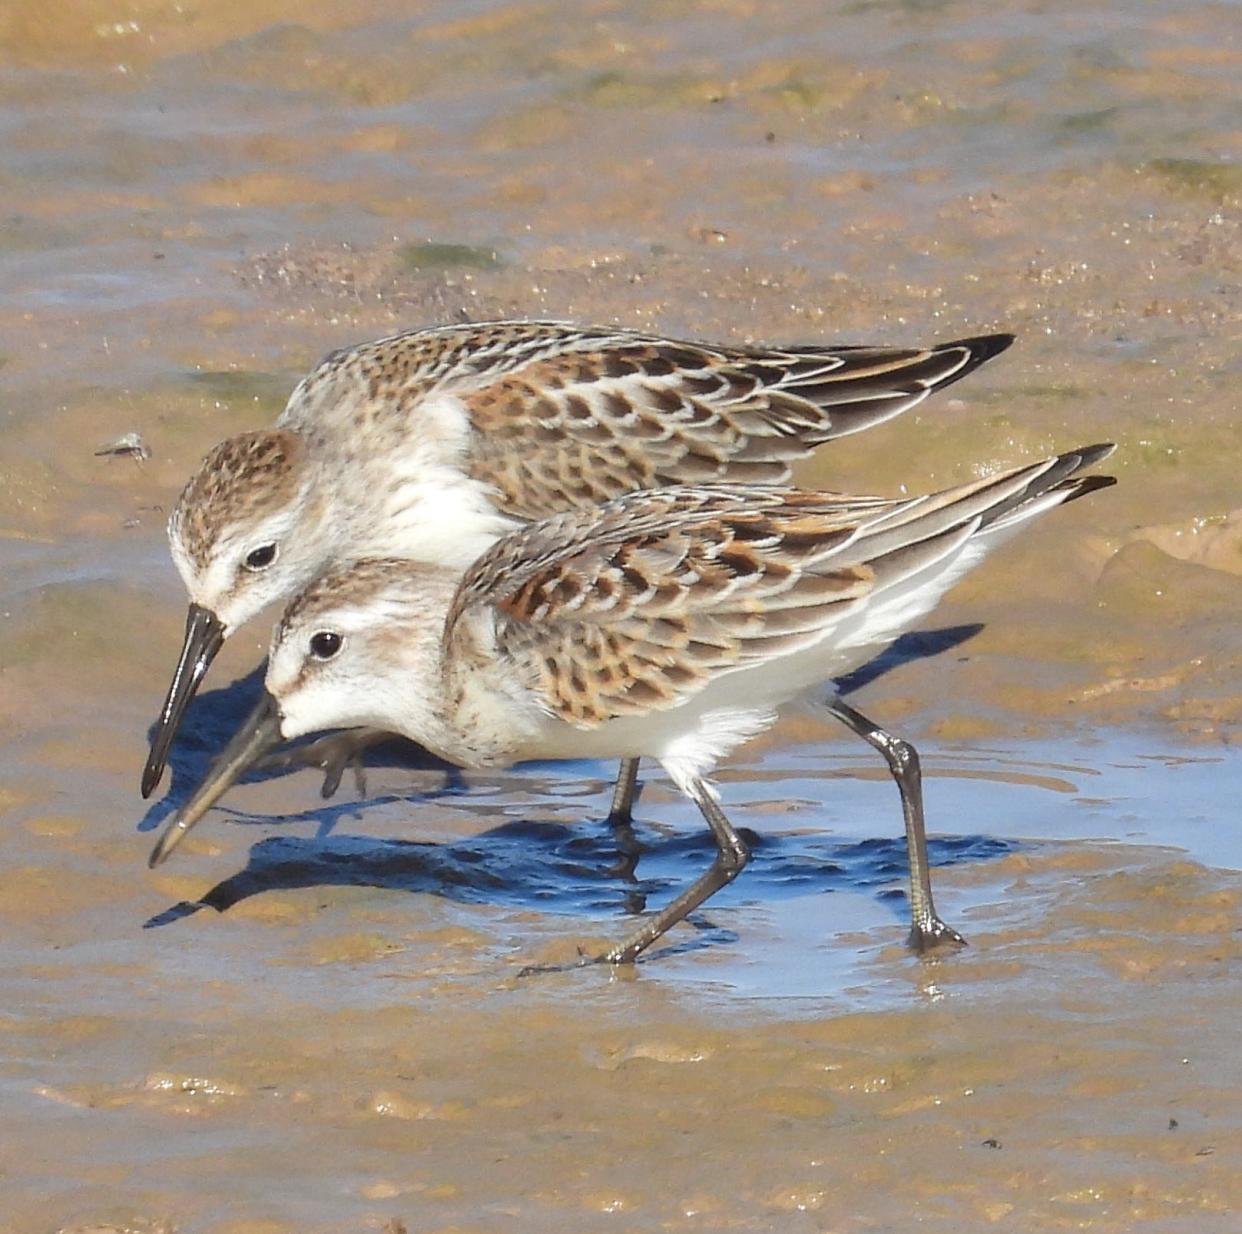 Bird watcher and Mesilla Valley Audobon Society Member Coleman Goin captured a duo of Western Sandpipers traveling through New Mexico. Western Sandpipers are a shorebird also known as "peeps." These birds breed in frigid areas of Alaska and Siberia.